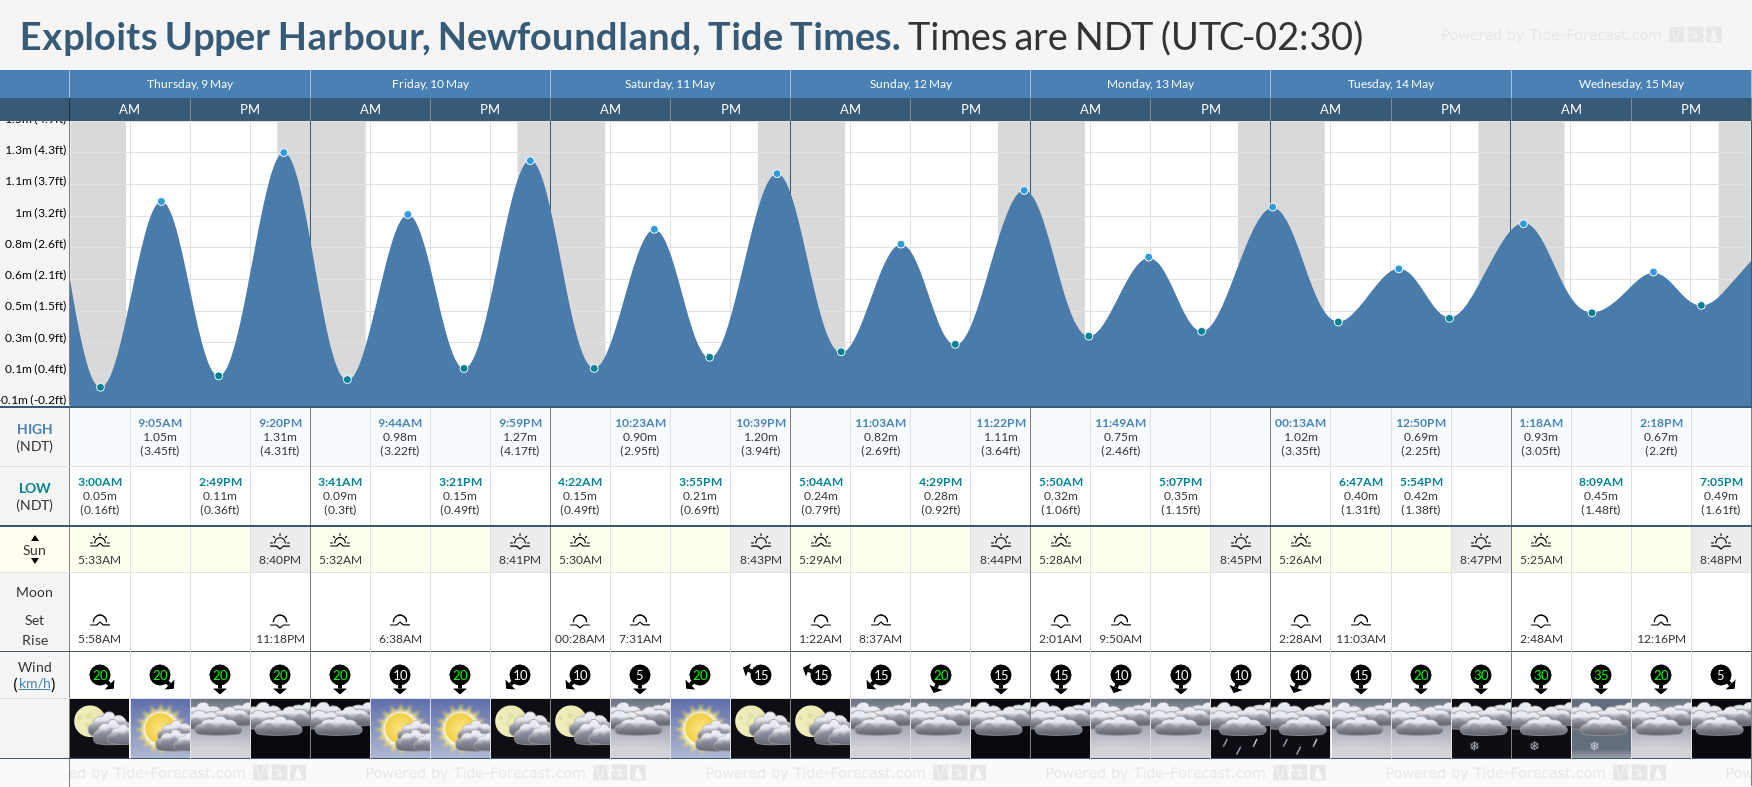 Exploits Upper Harbour, Newfoundland Tide Chart including high and low tide tide times for the next 7 days